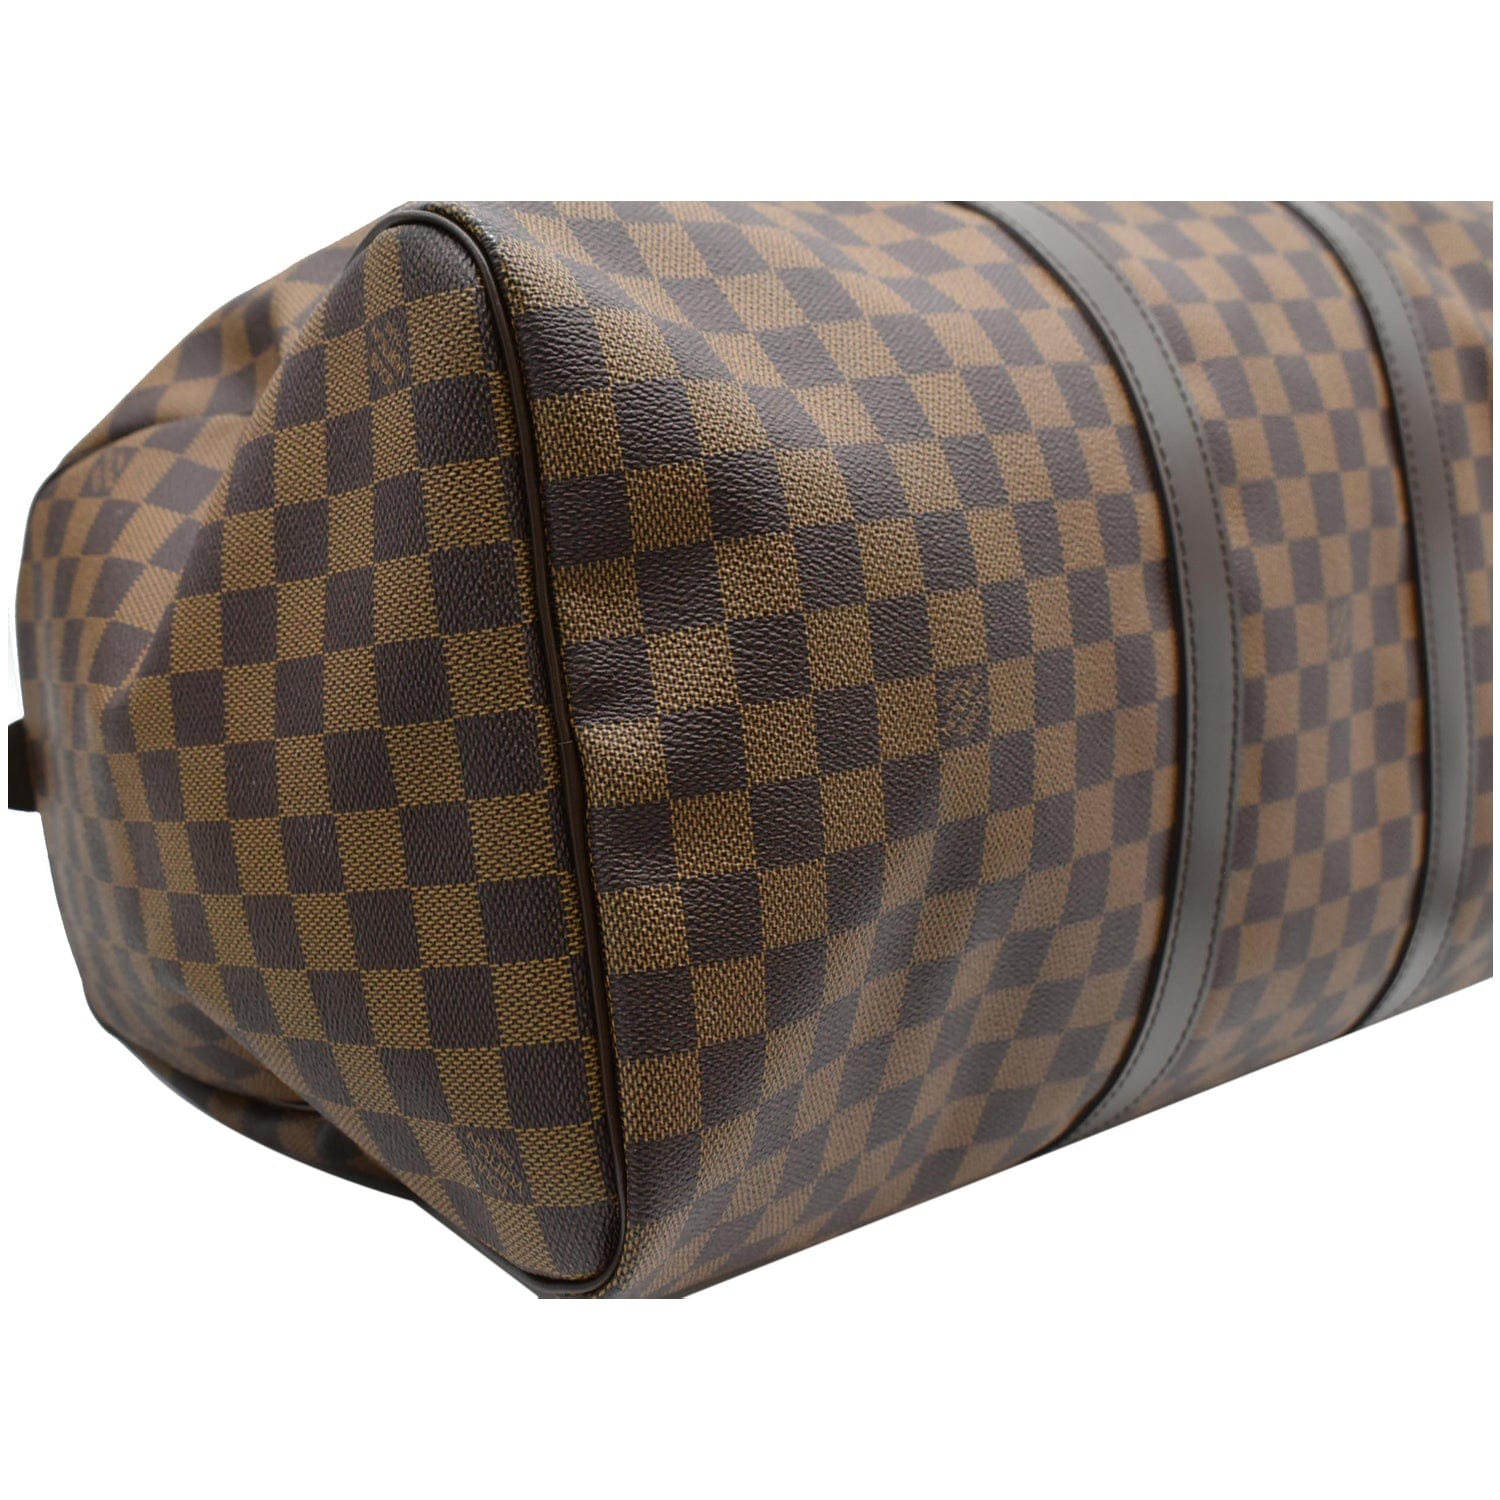 Louis Vuitton Damier Ebene Keepall 50 - Brown Luggage and Travel